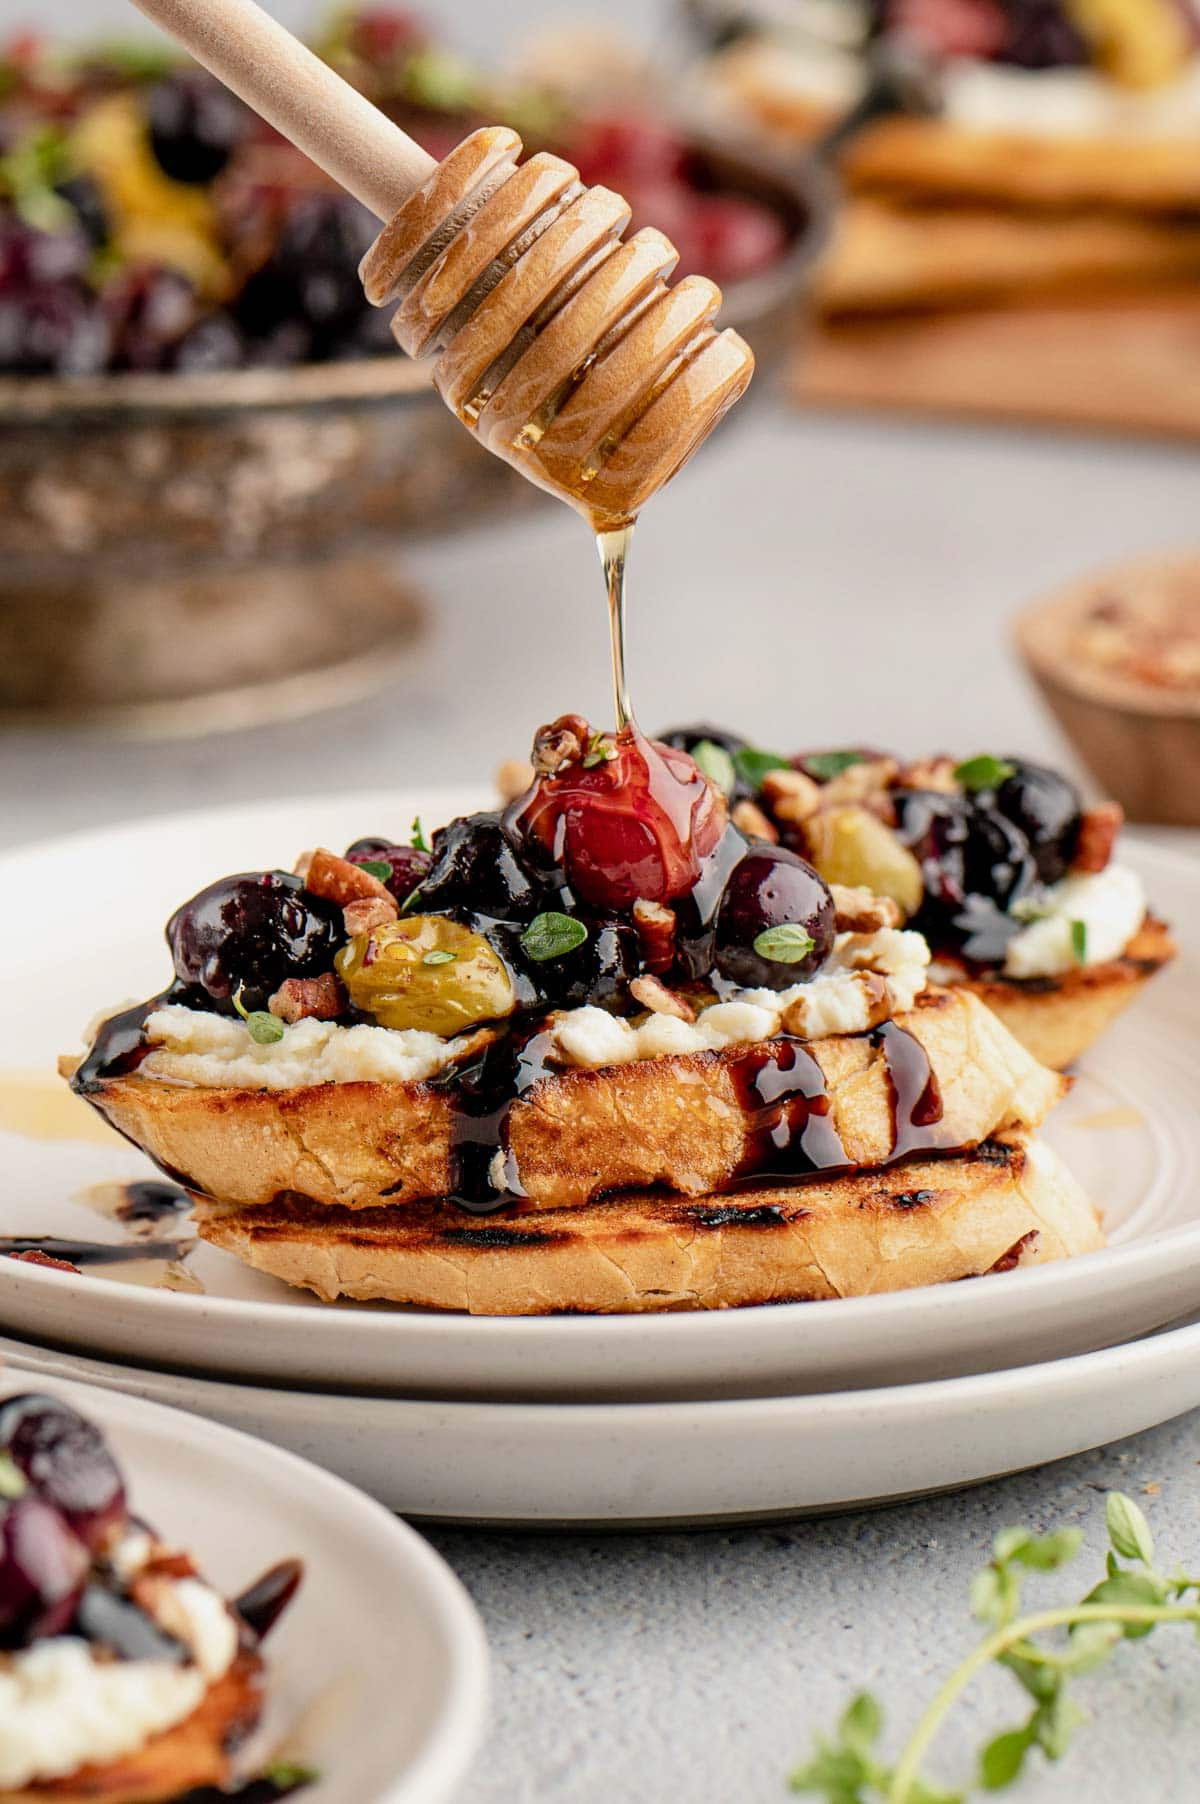 Roasted grapes on a crostini, with a honey drizzle.